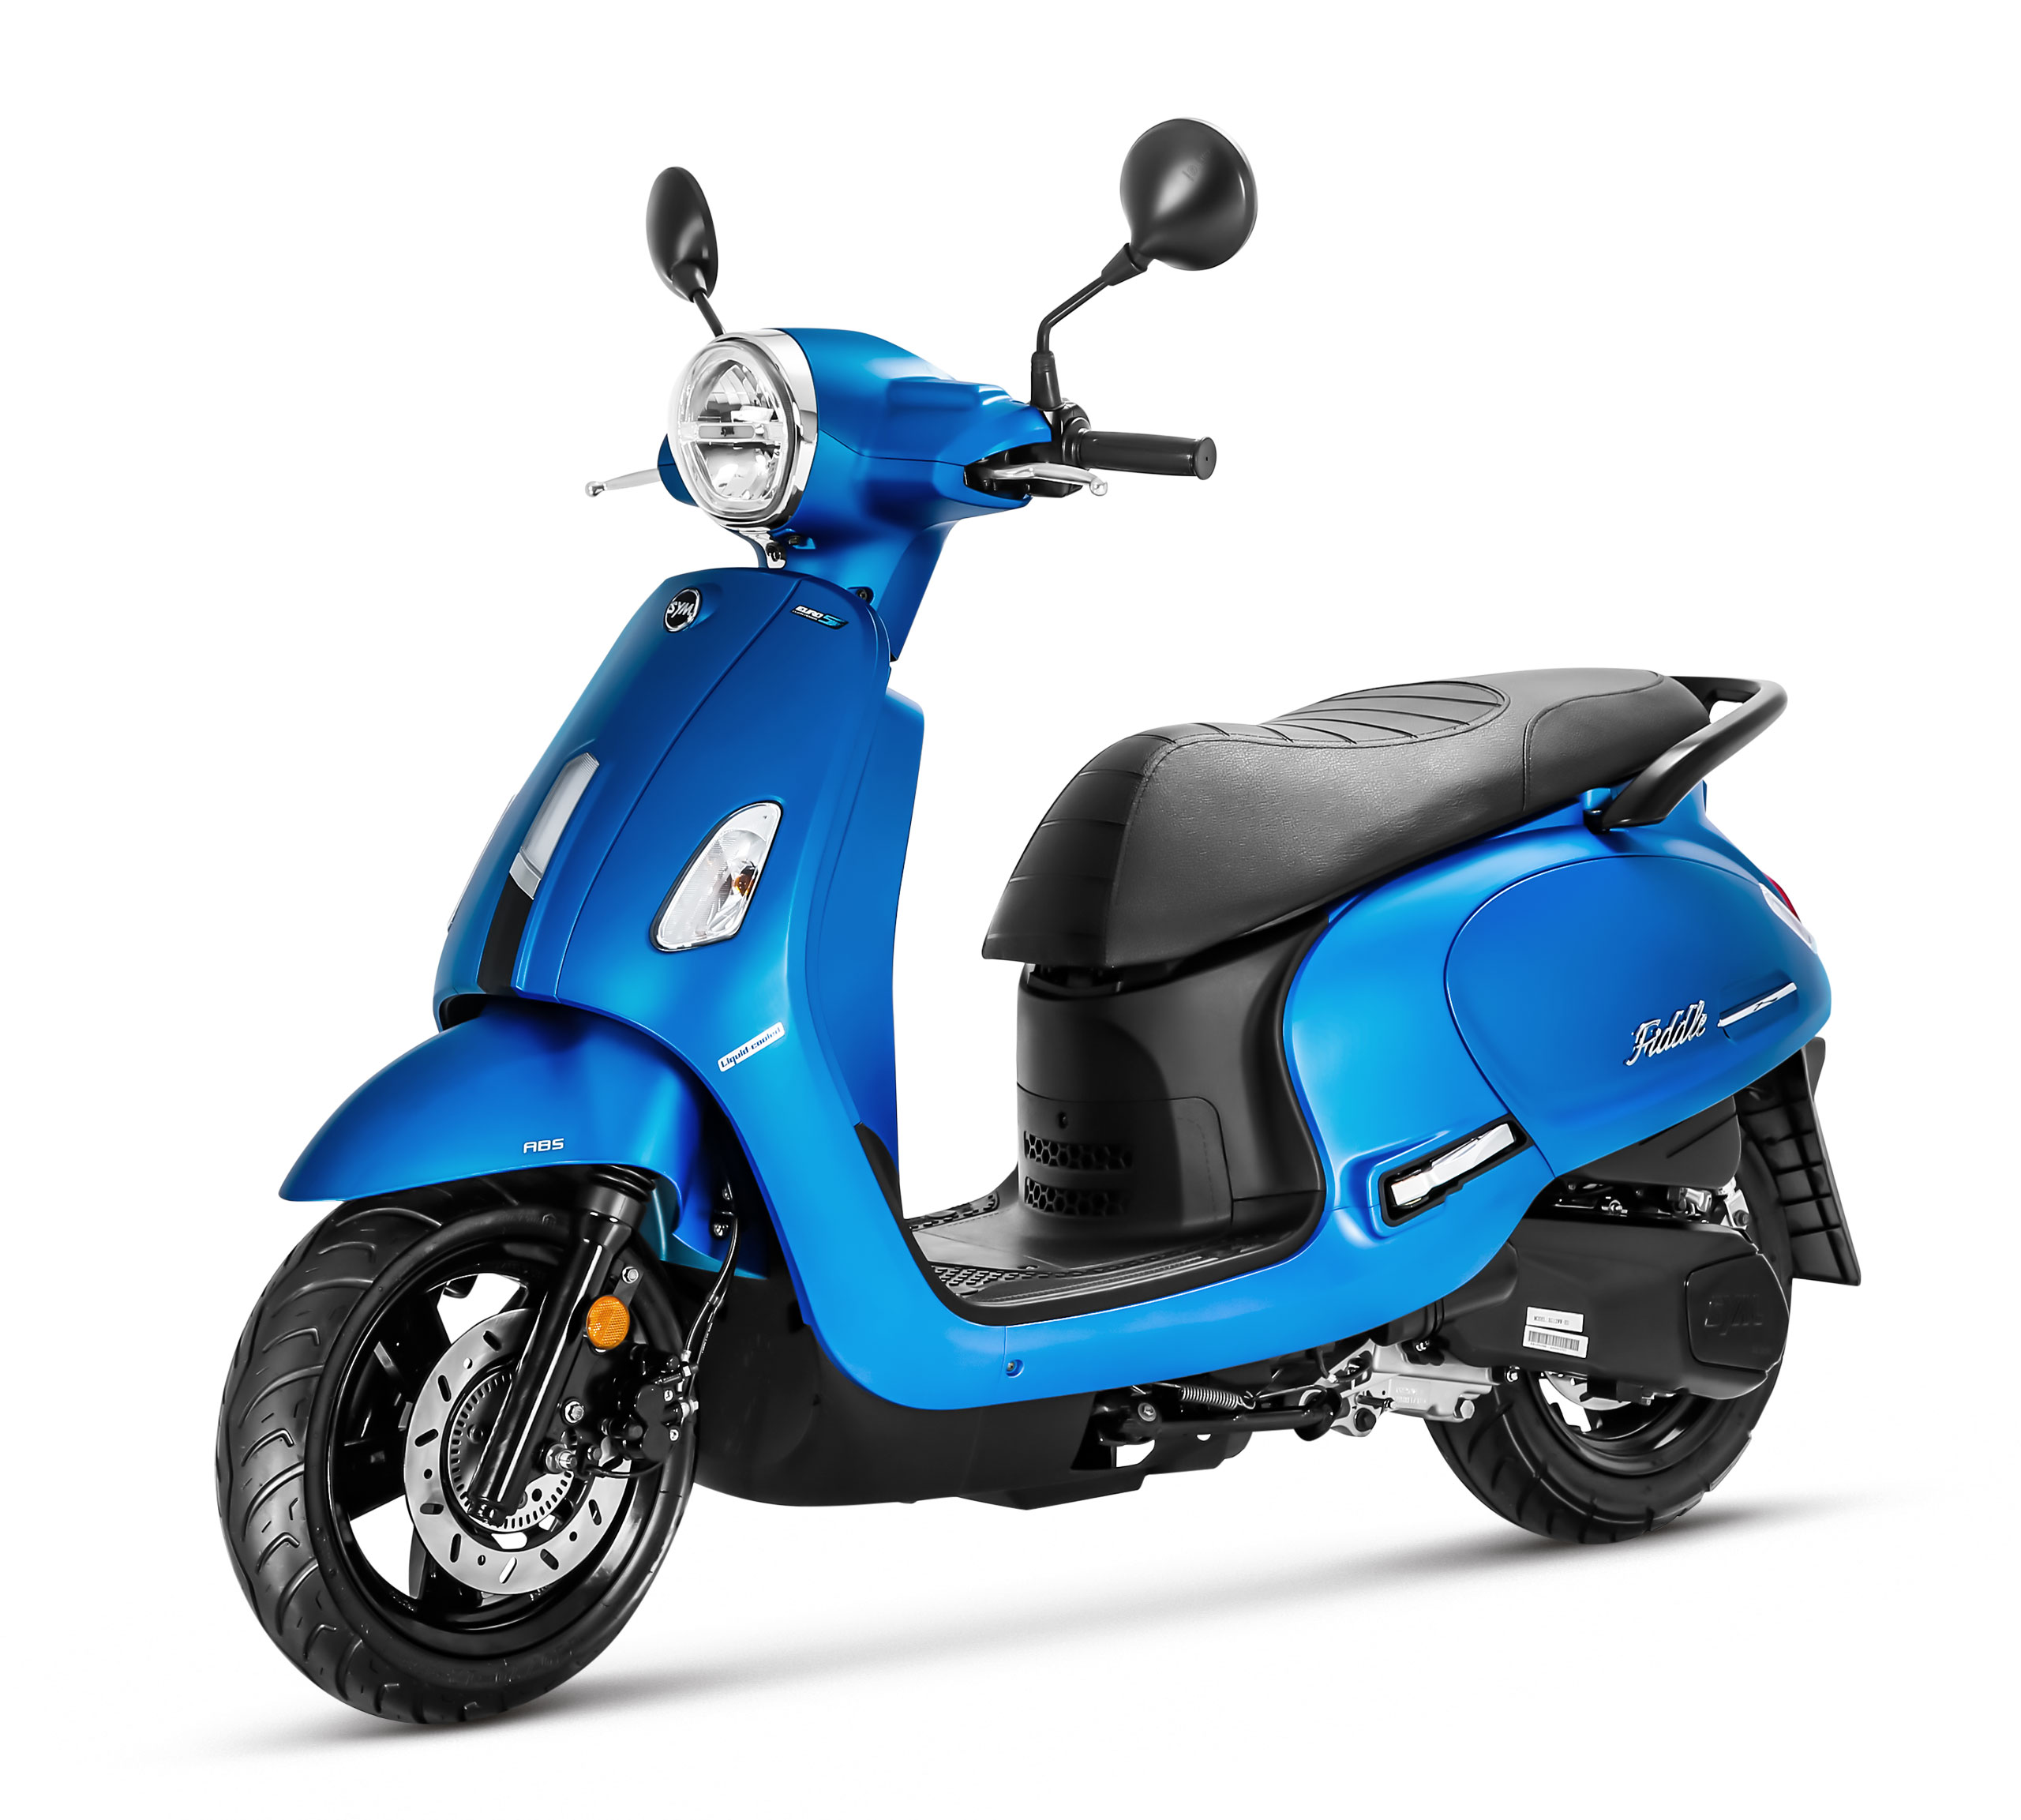 Scooter 125cc pas cher, scooters neuf pas cher-LANRONG INTERNATIONAL